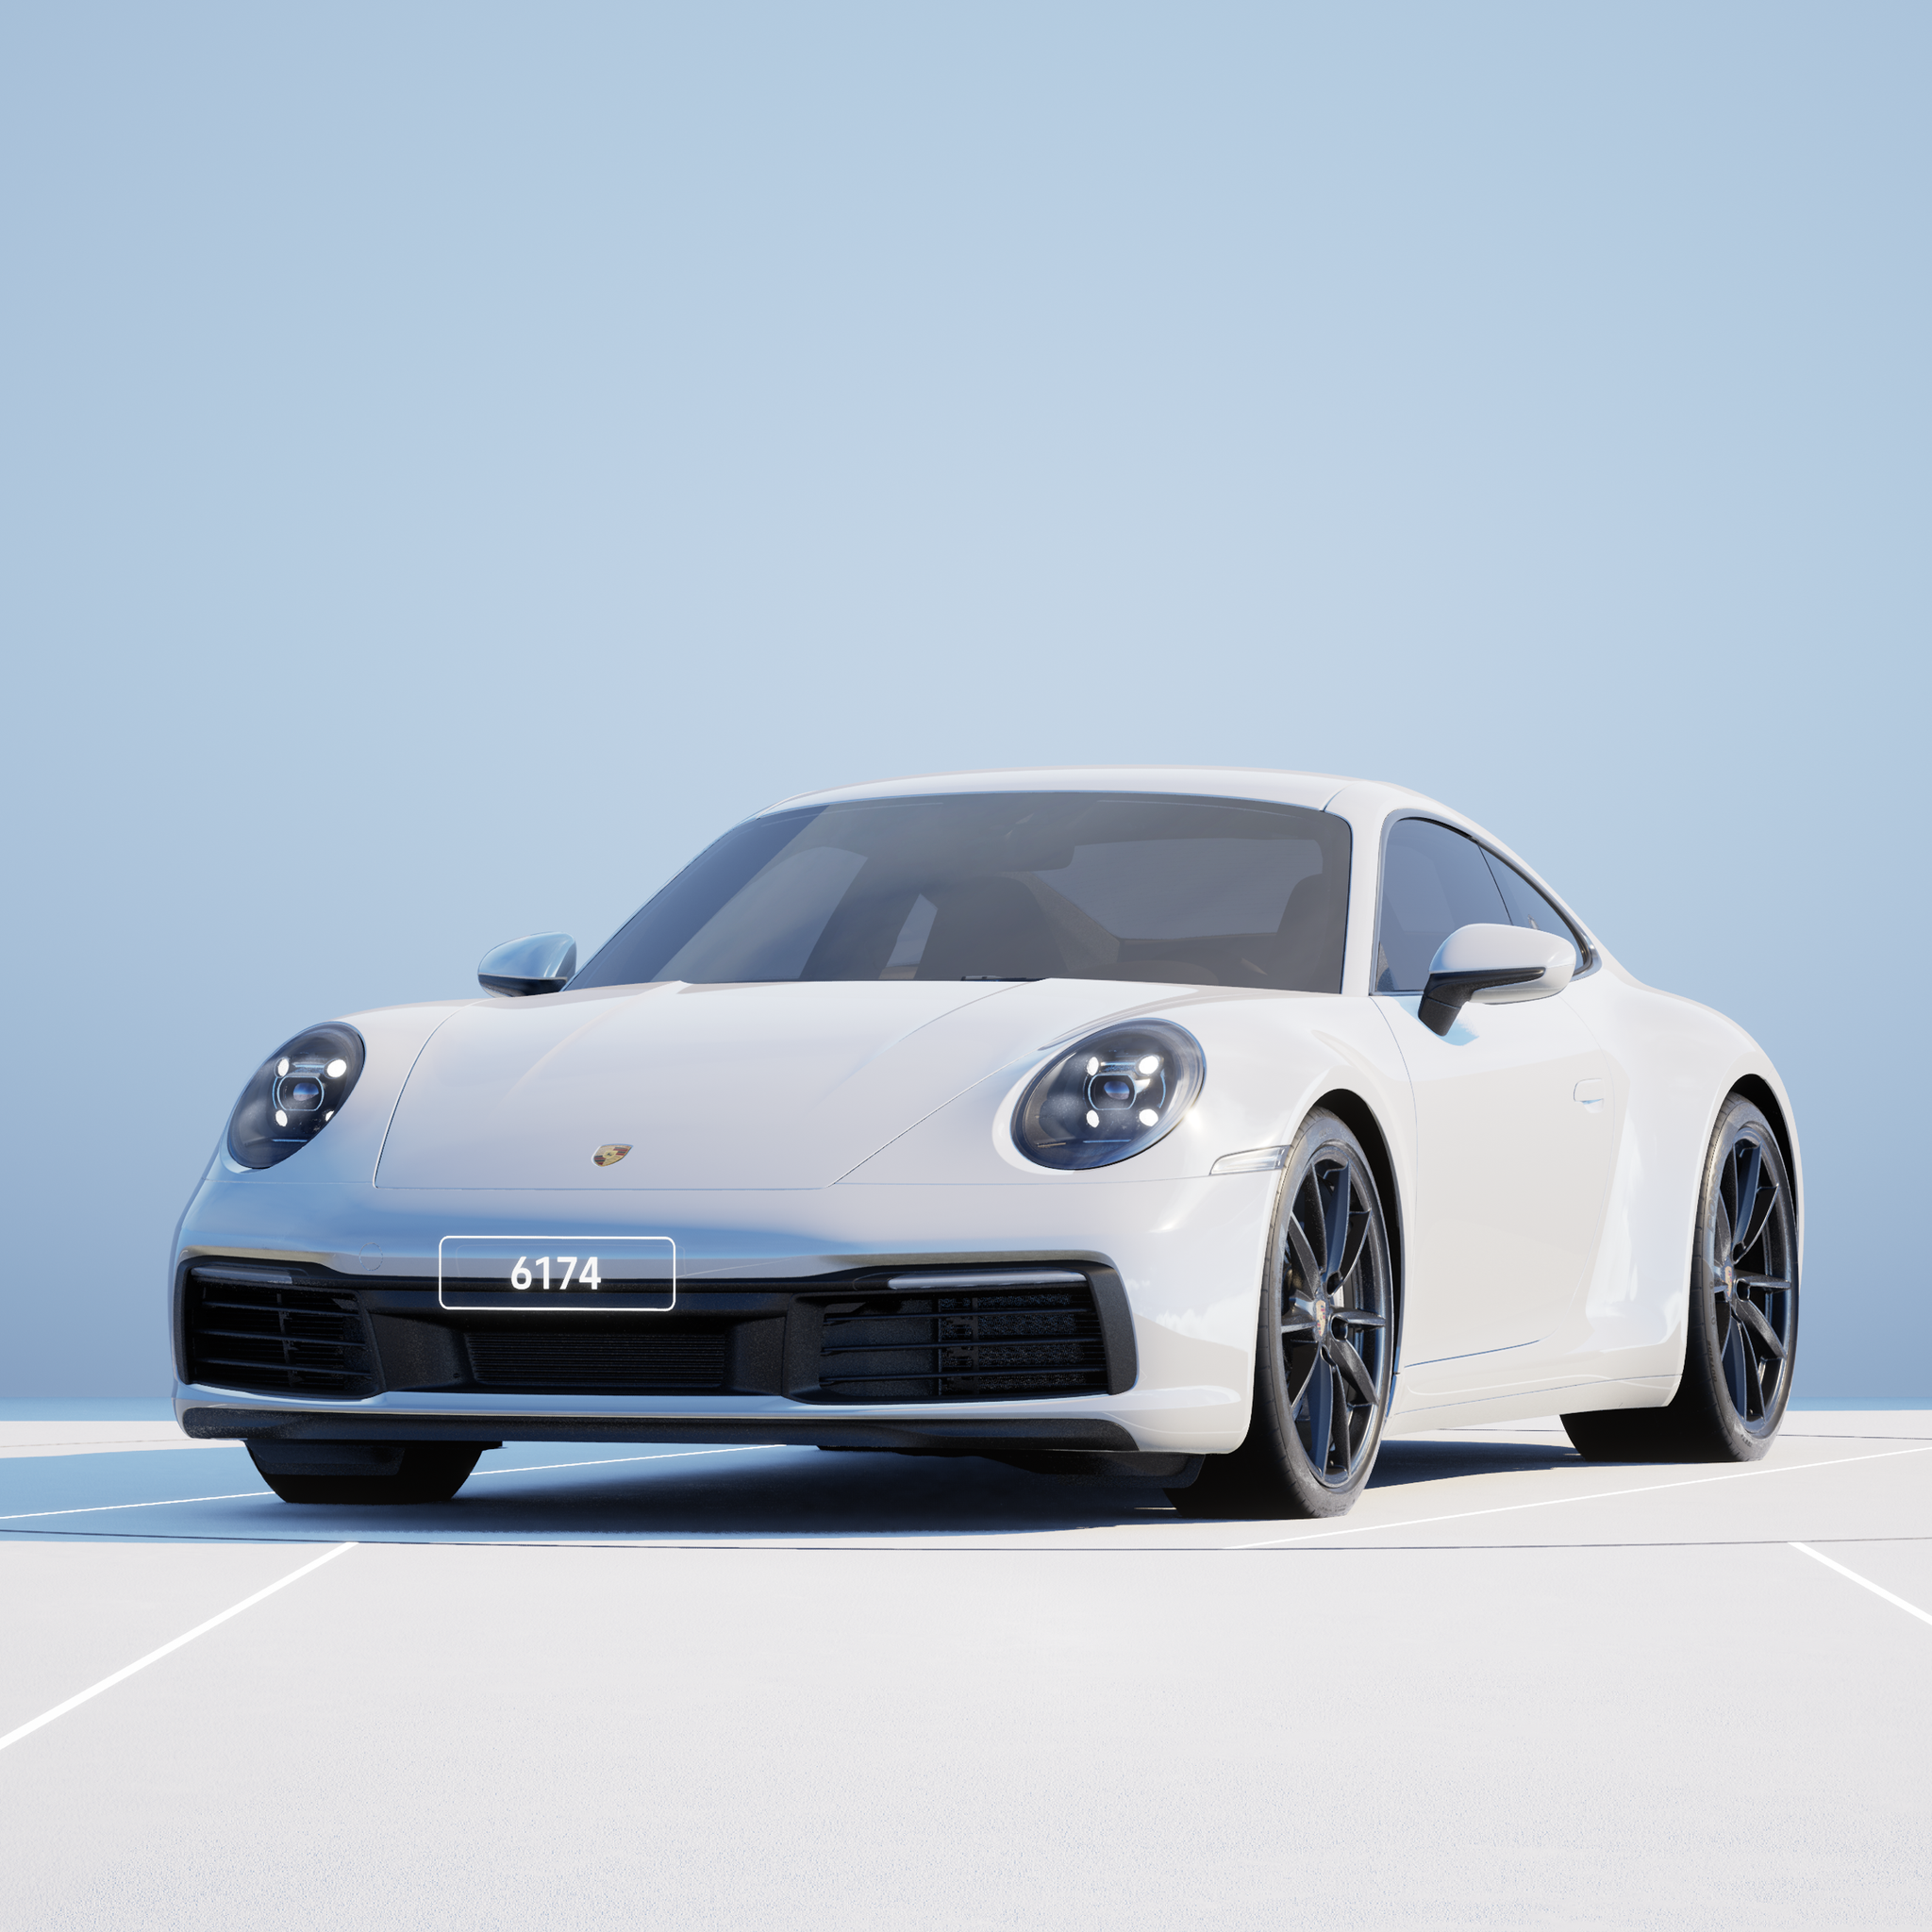 The PORSCHΞ 911 6174 image in phase